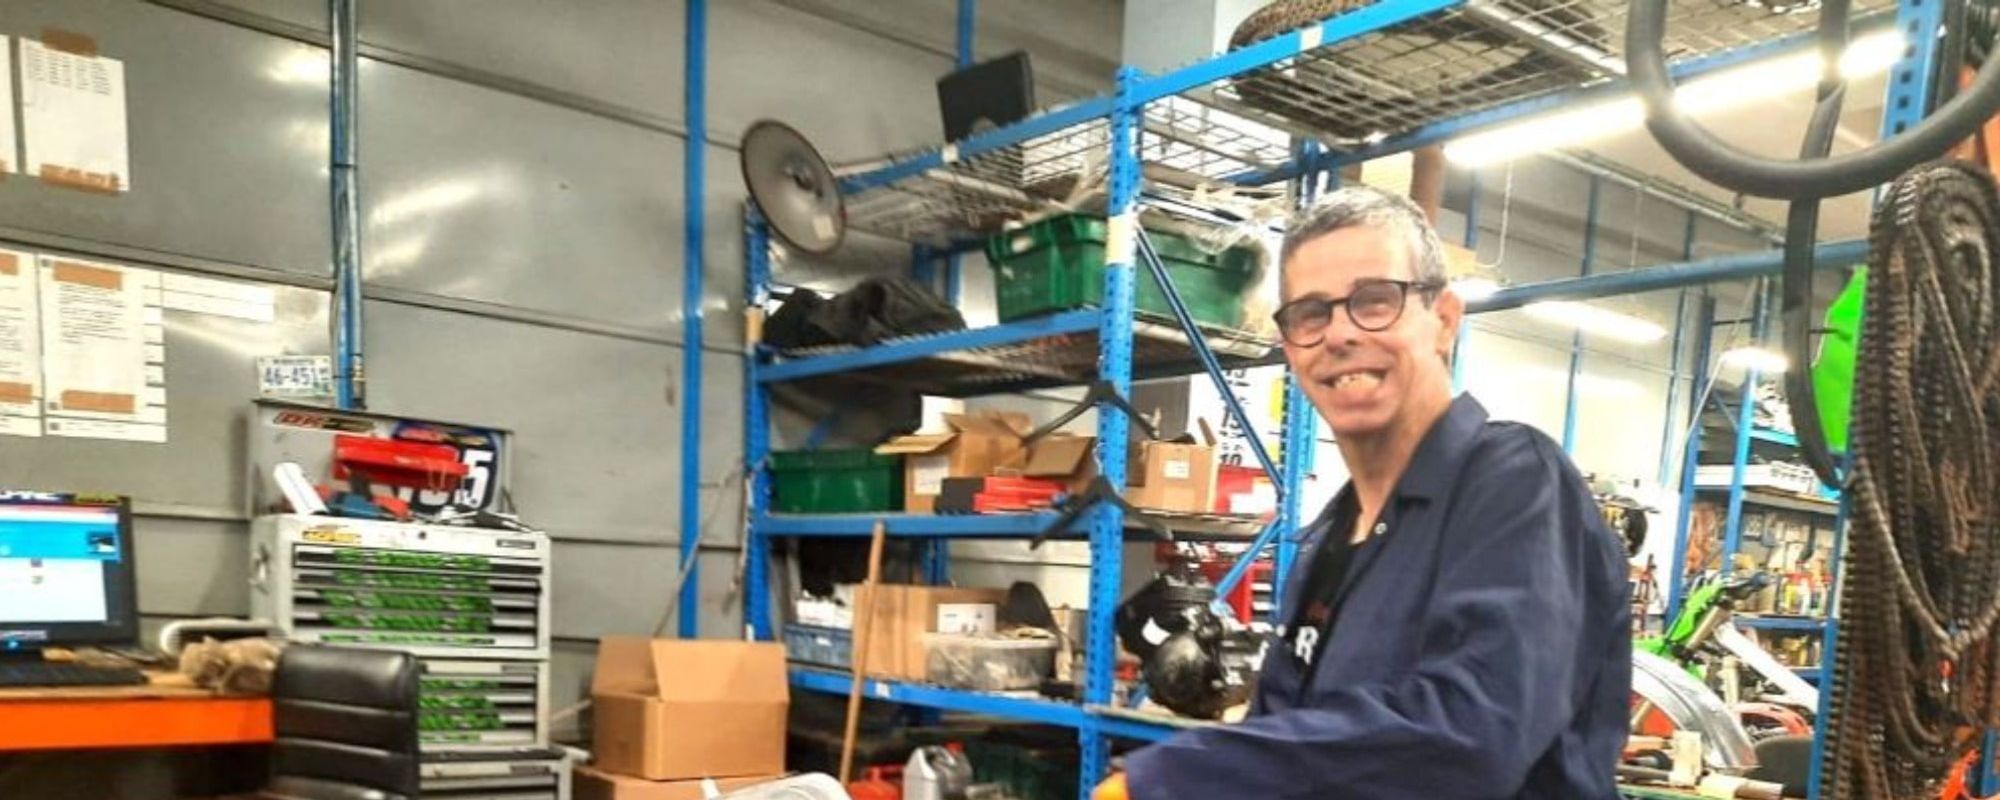 A man with a learning disability volunteers at a mechanics garage